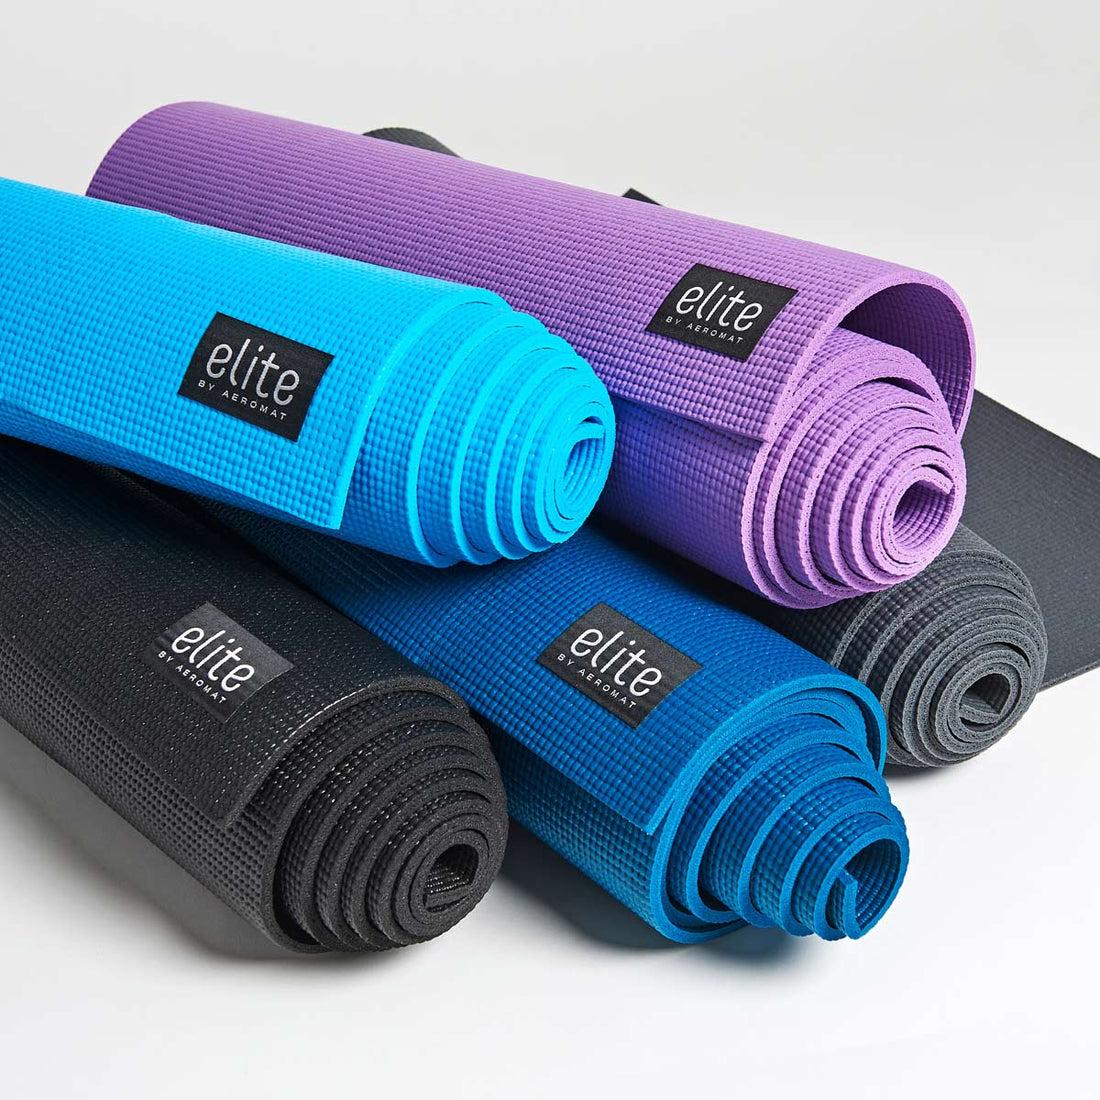 Yoga Direct: Shop for the Best Yoga Mats, Props & Yoga Accessories